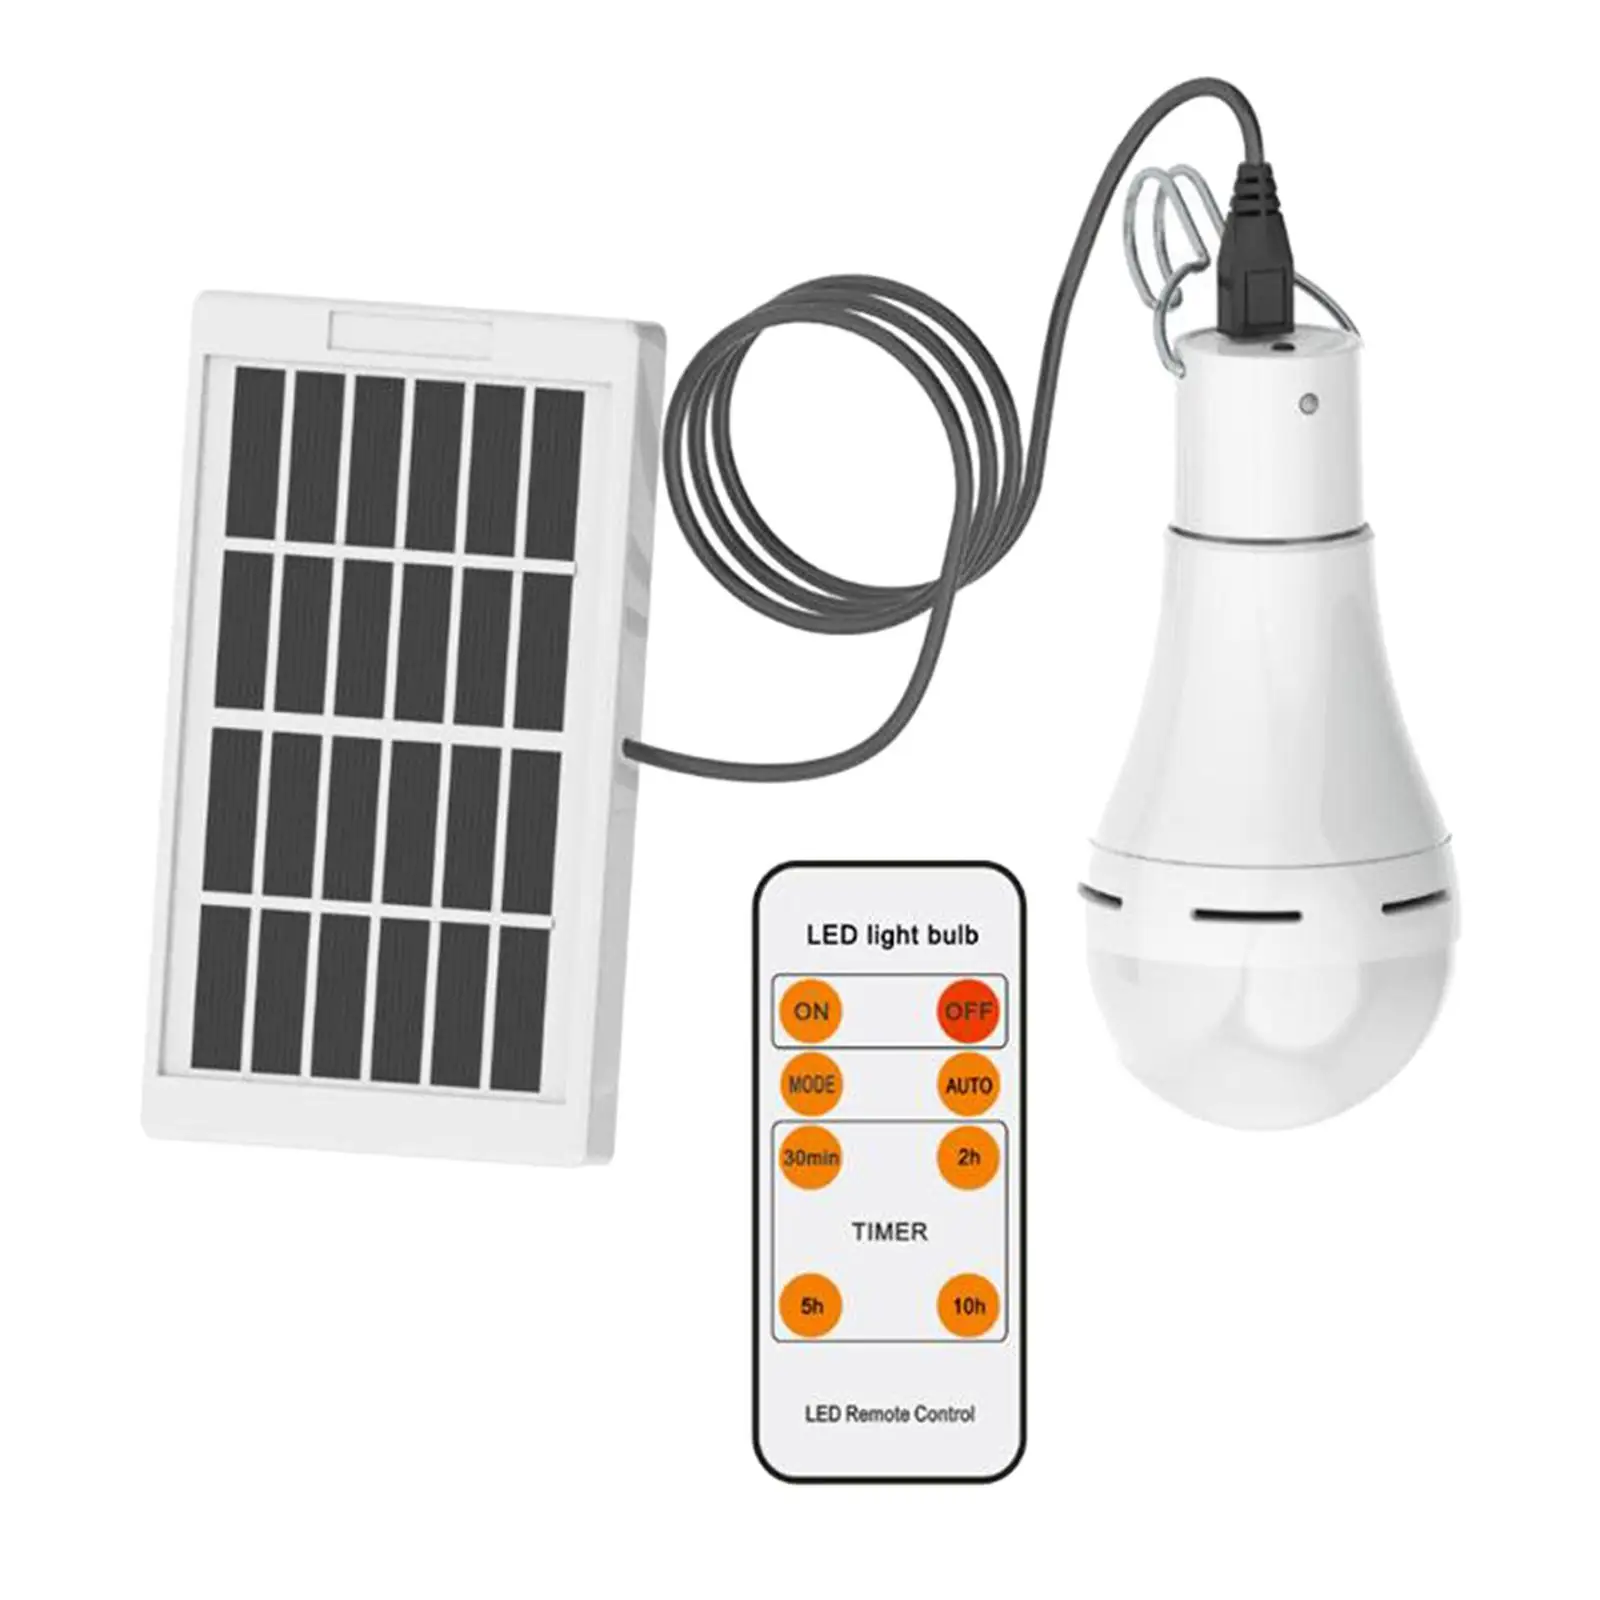 Solar Powered Shed Light Bulb Portable Hang Up 9W Lamp Chicken Coop Lighting